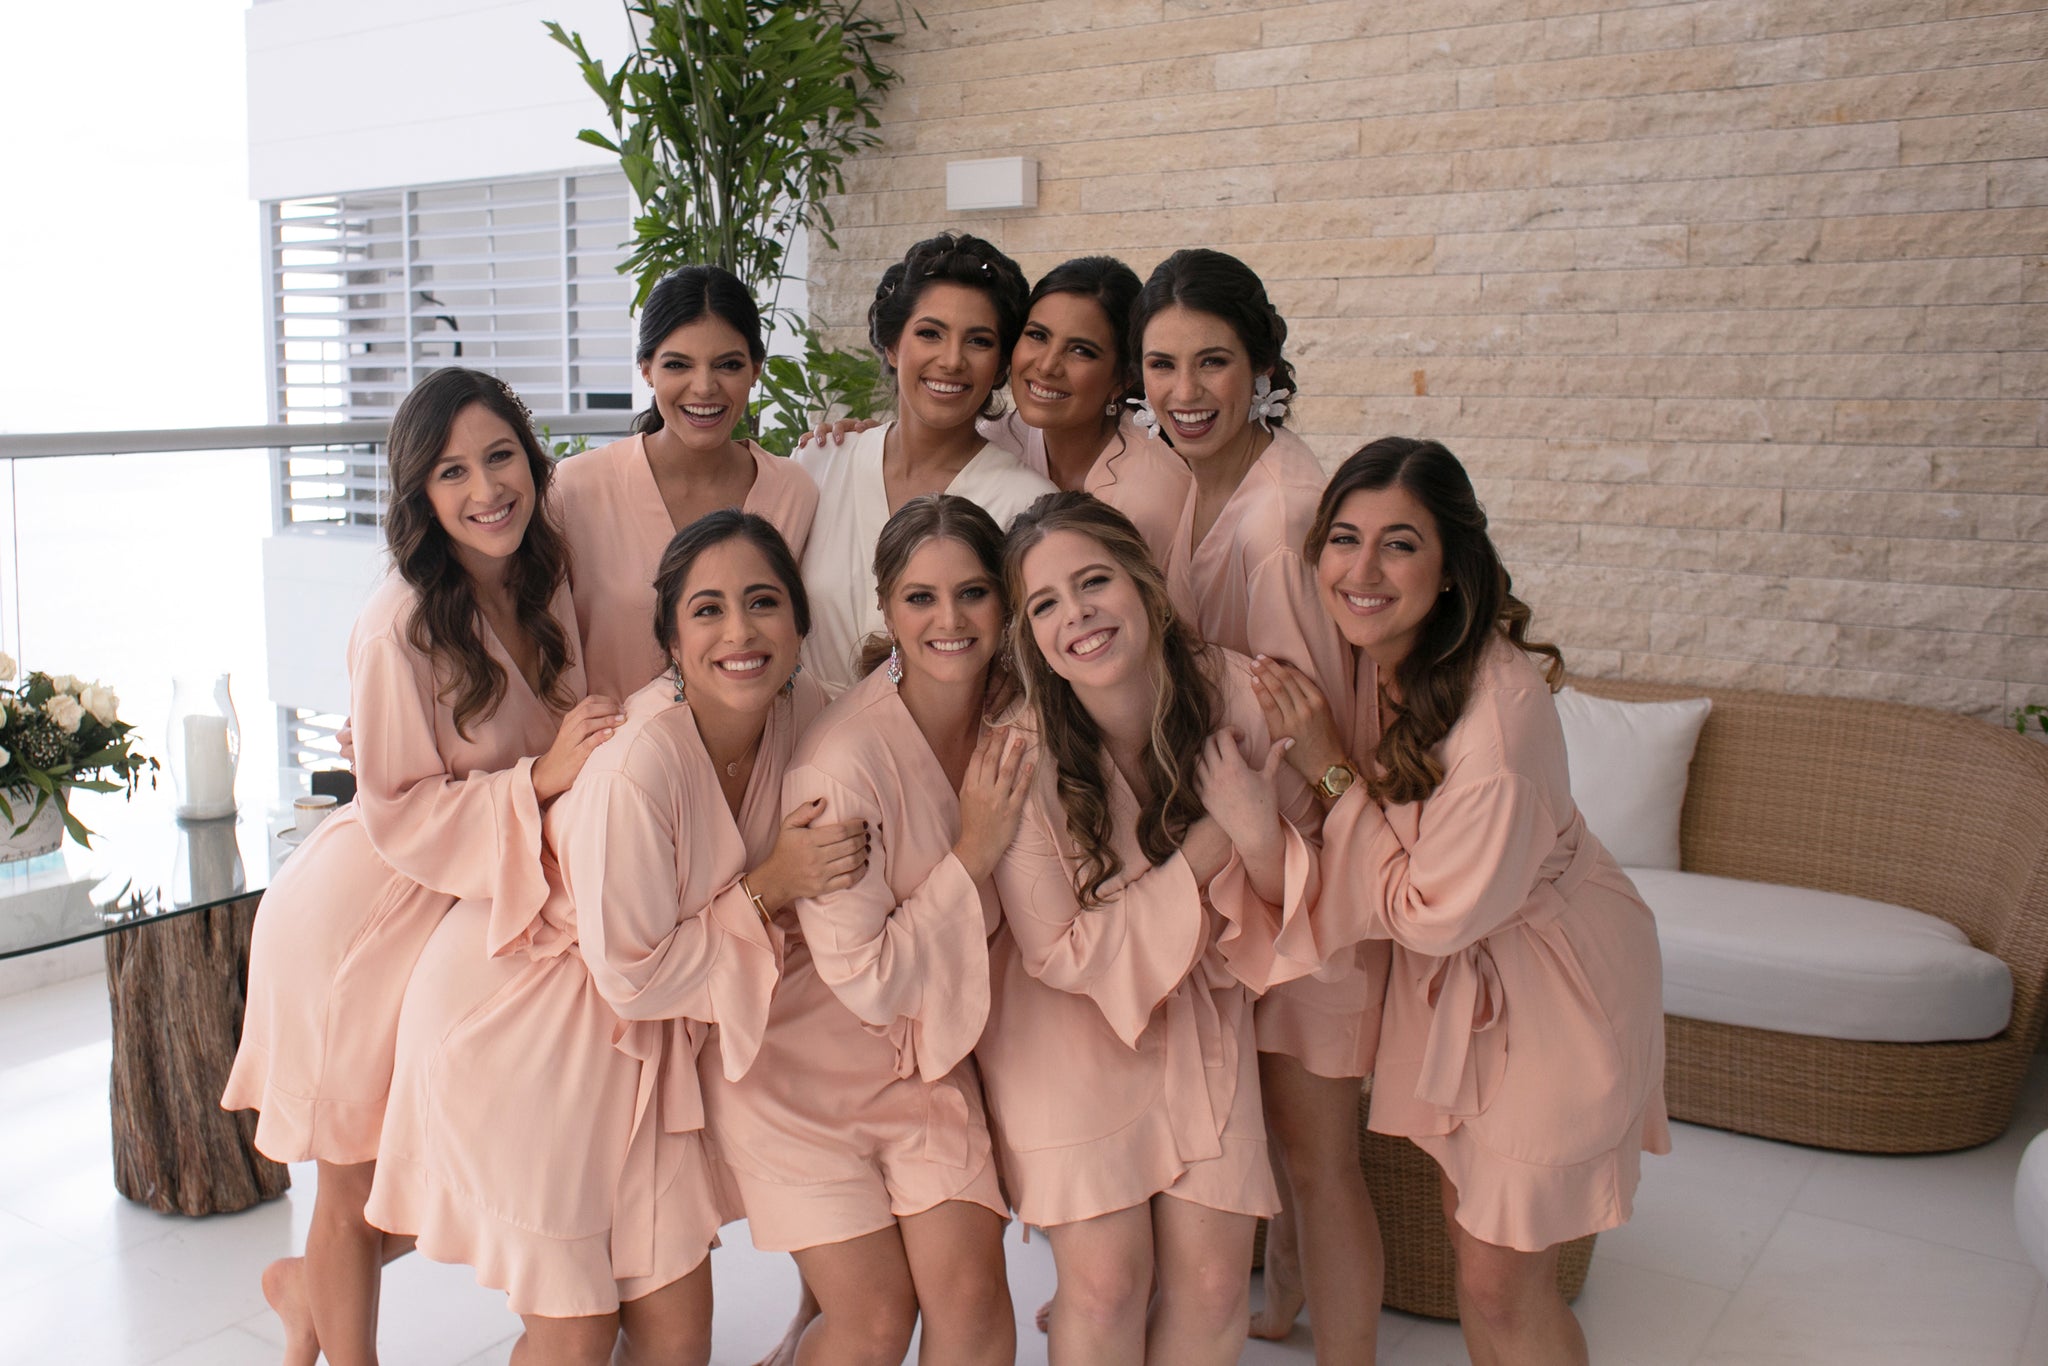 The bride with her bridesmaids in their sustainably made Ruffle Robes by Half Asleep